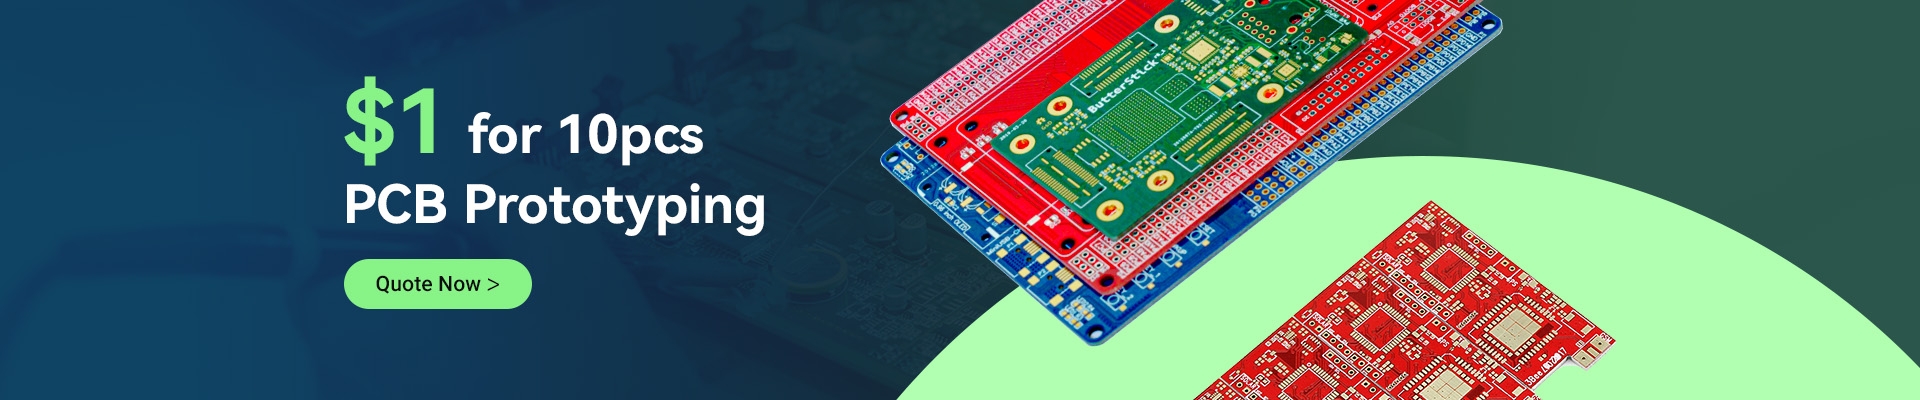 https://www.pcbwave.com/pcb-manufacturing.html